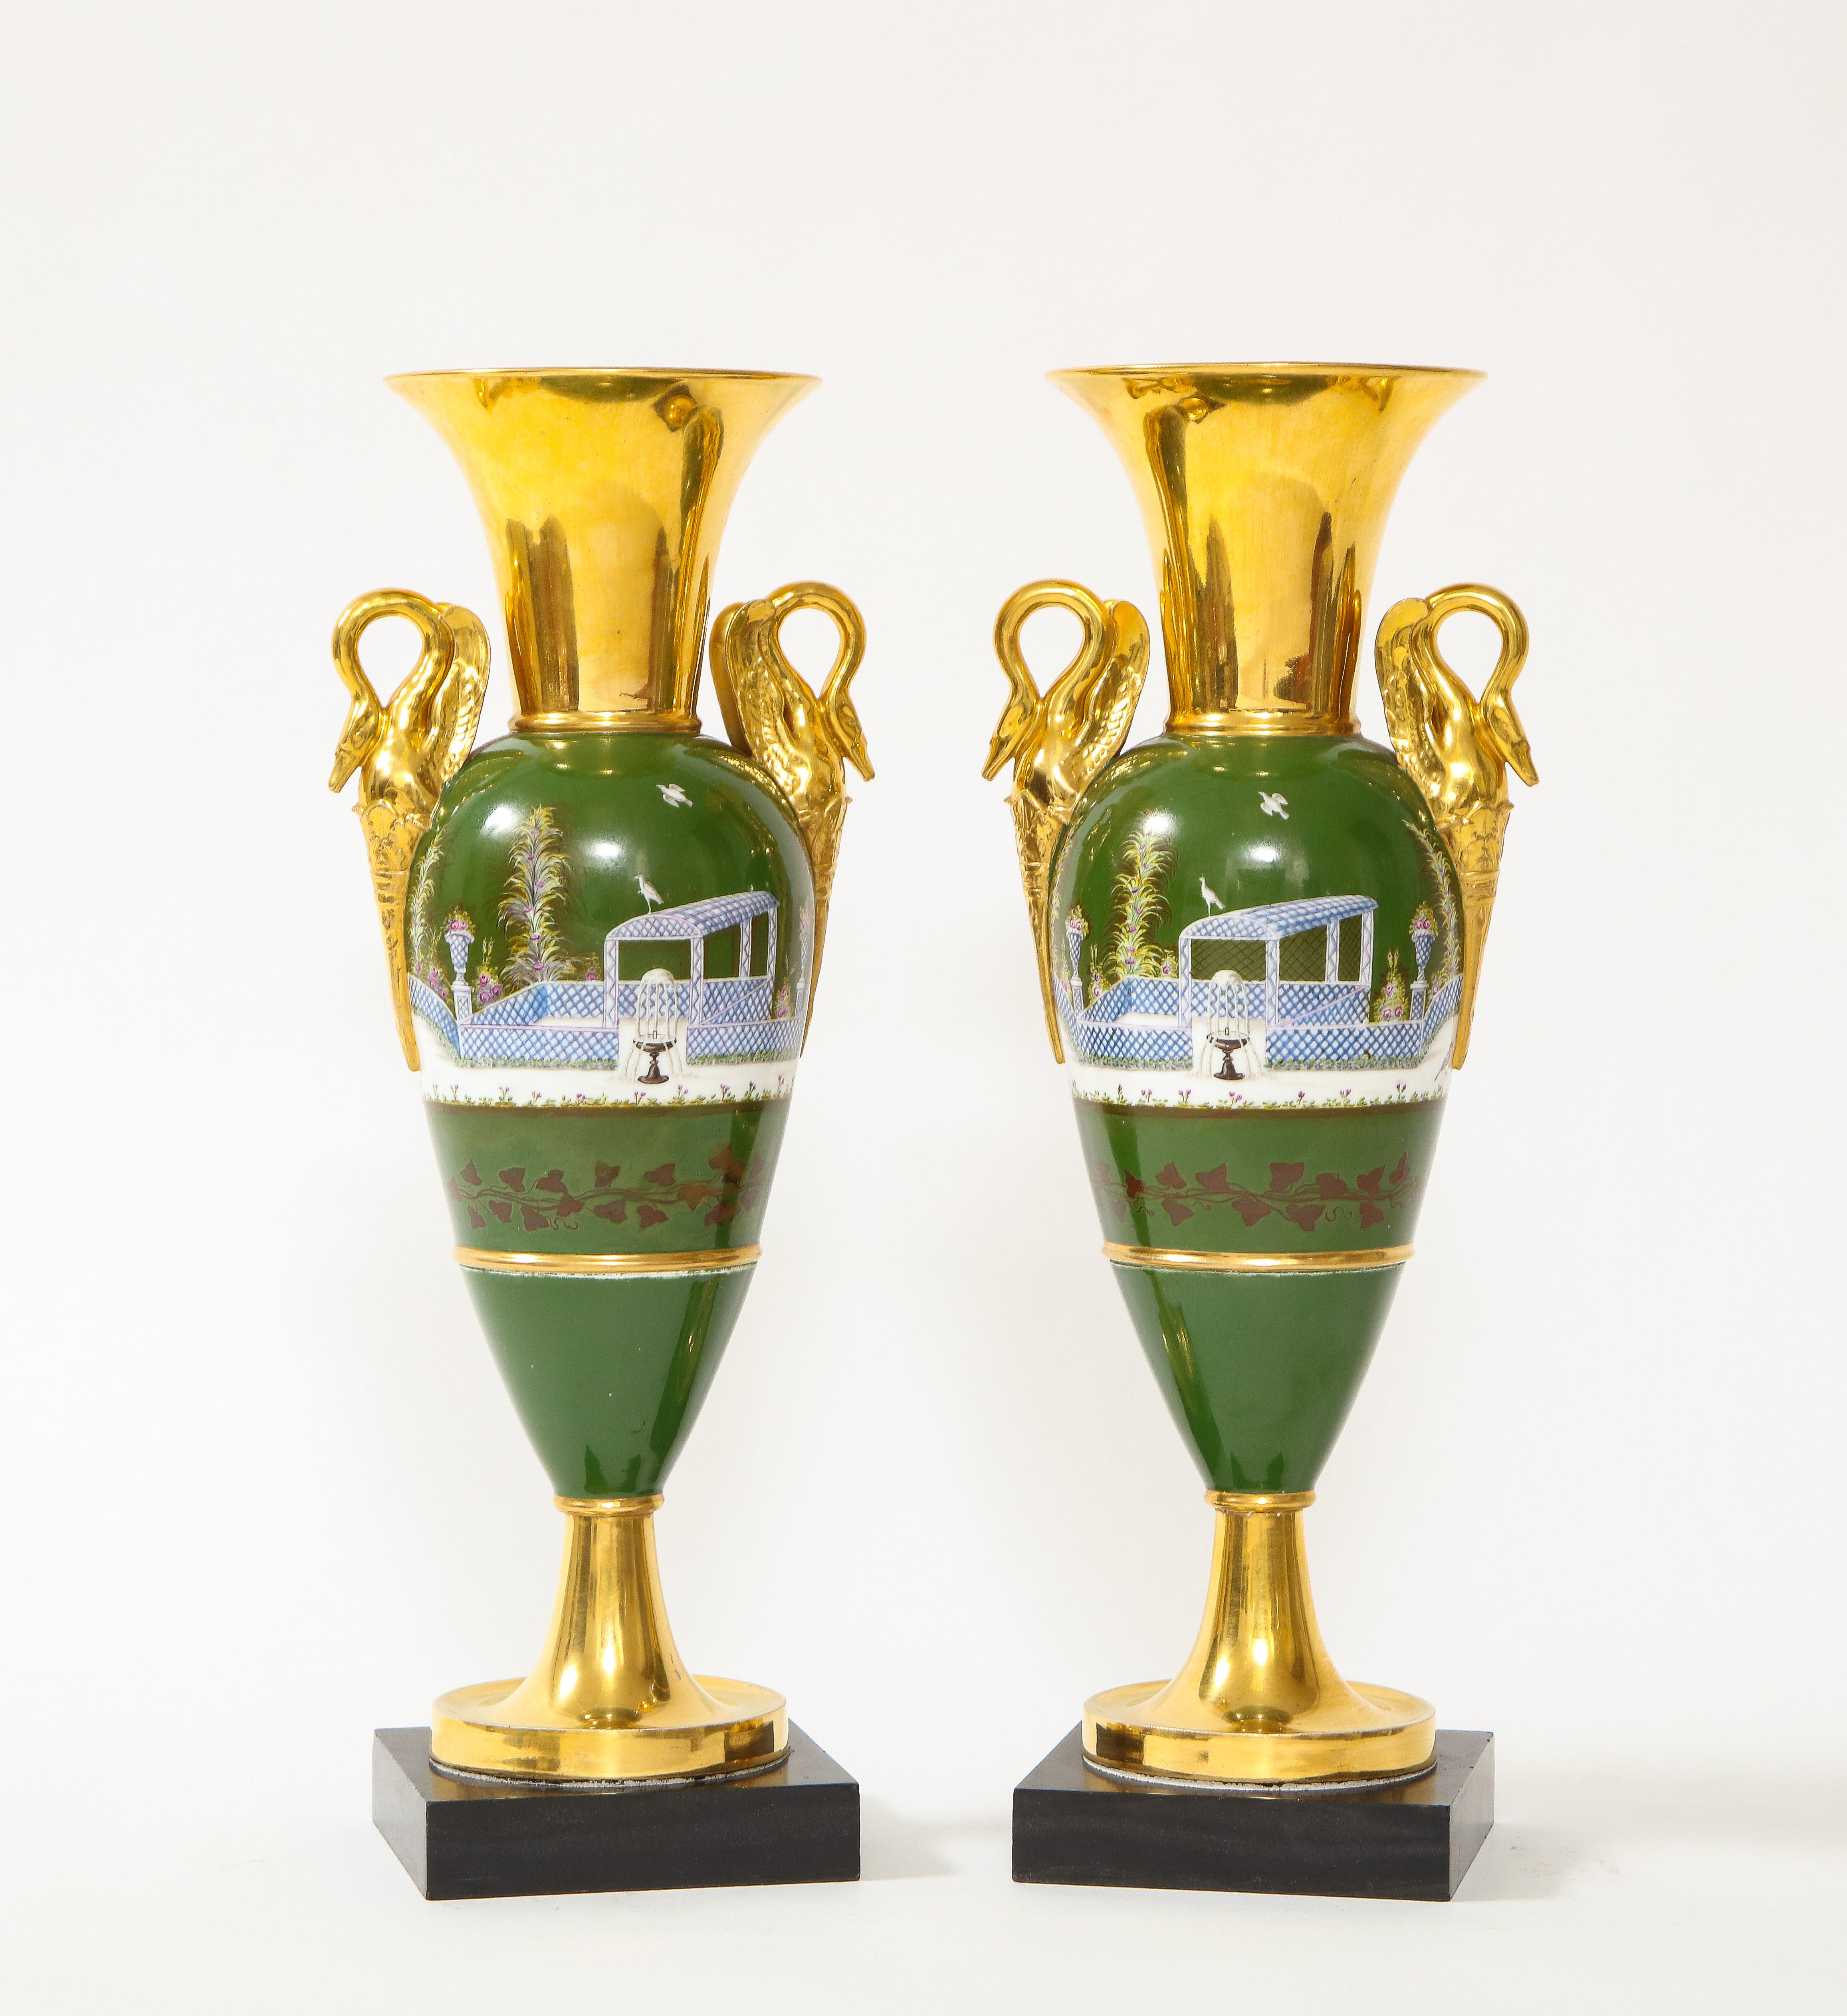 A fine pair of French 19th century Empire Period Old Paris porcelain swan handle vases. Each is beautifully hand-painted with a green colored ground and further adorned with 24K gold-painted accents around the neck, handles, and bases. The vases are